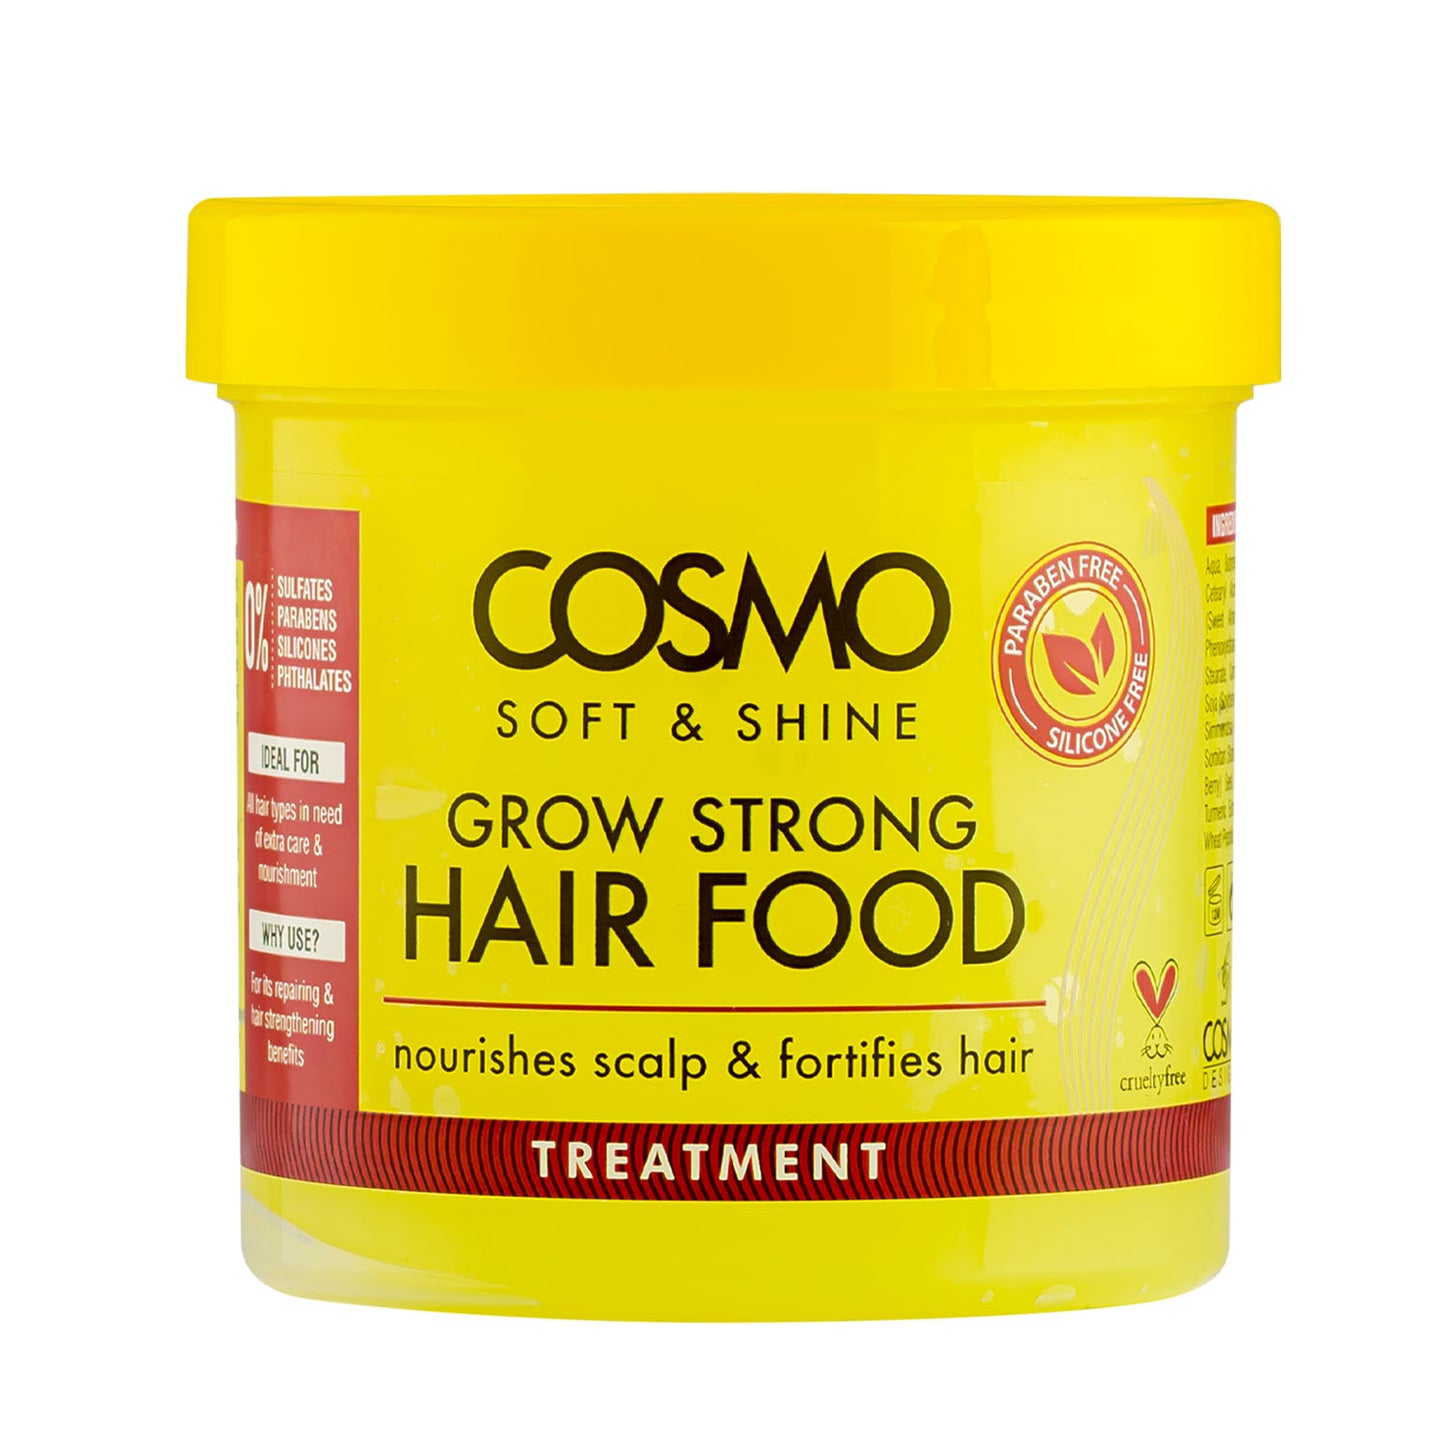 COSMO SOFT & SHINE GROW STRONG HAIR FOOD TREATMENT 175G